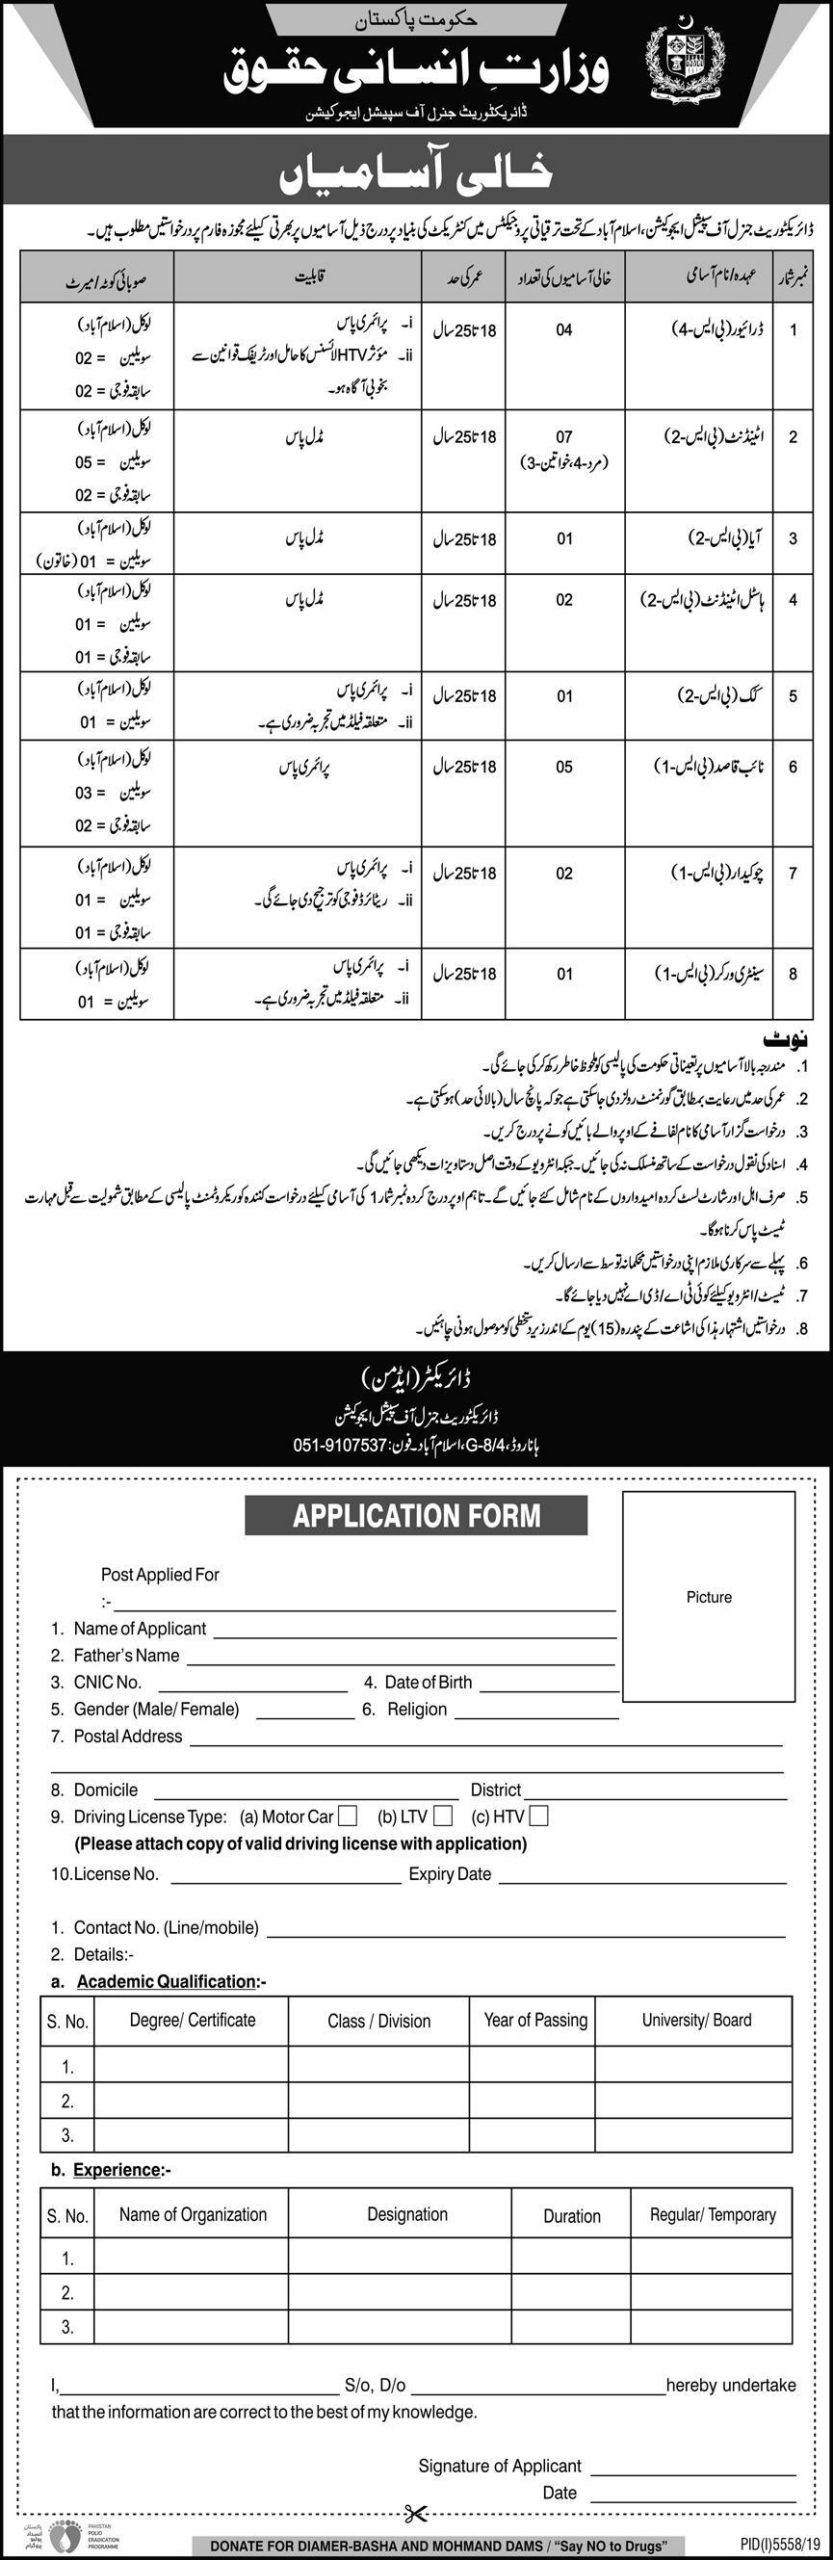 Ministry Of Human Rights | Jobs in Pakistan 2020